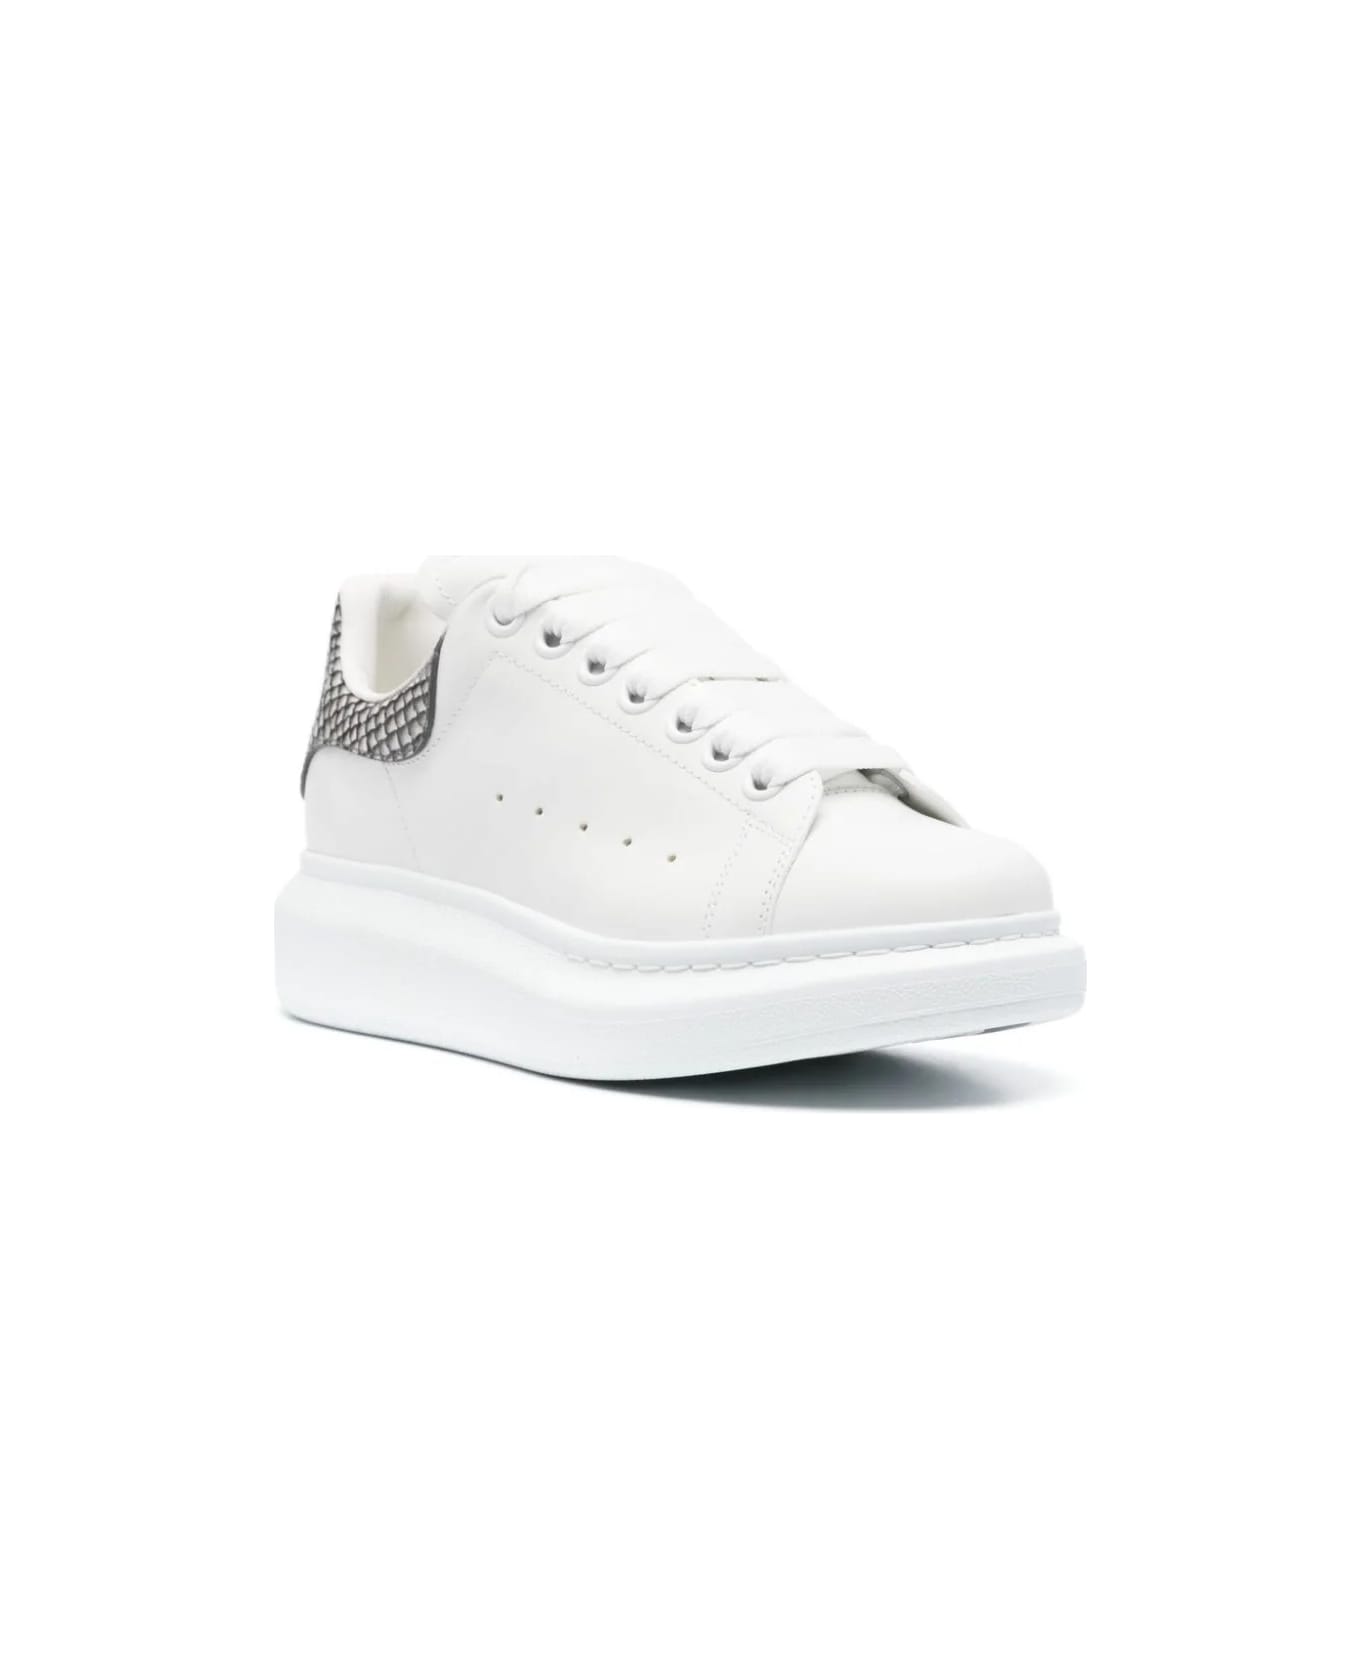 Alexander McQueen White Oversized Sneakers With Snake Print features - White